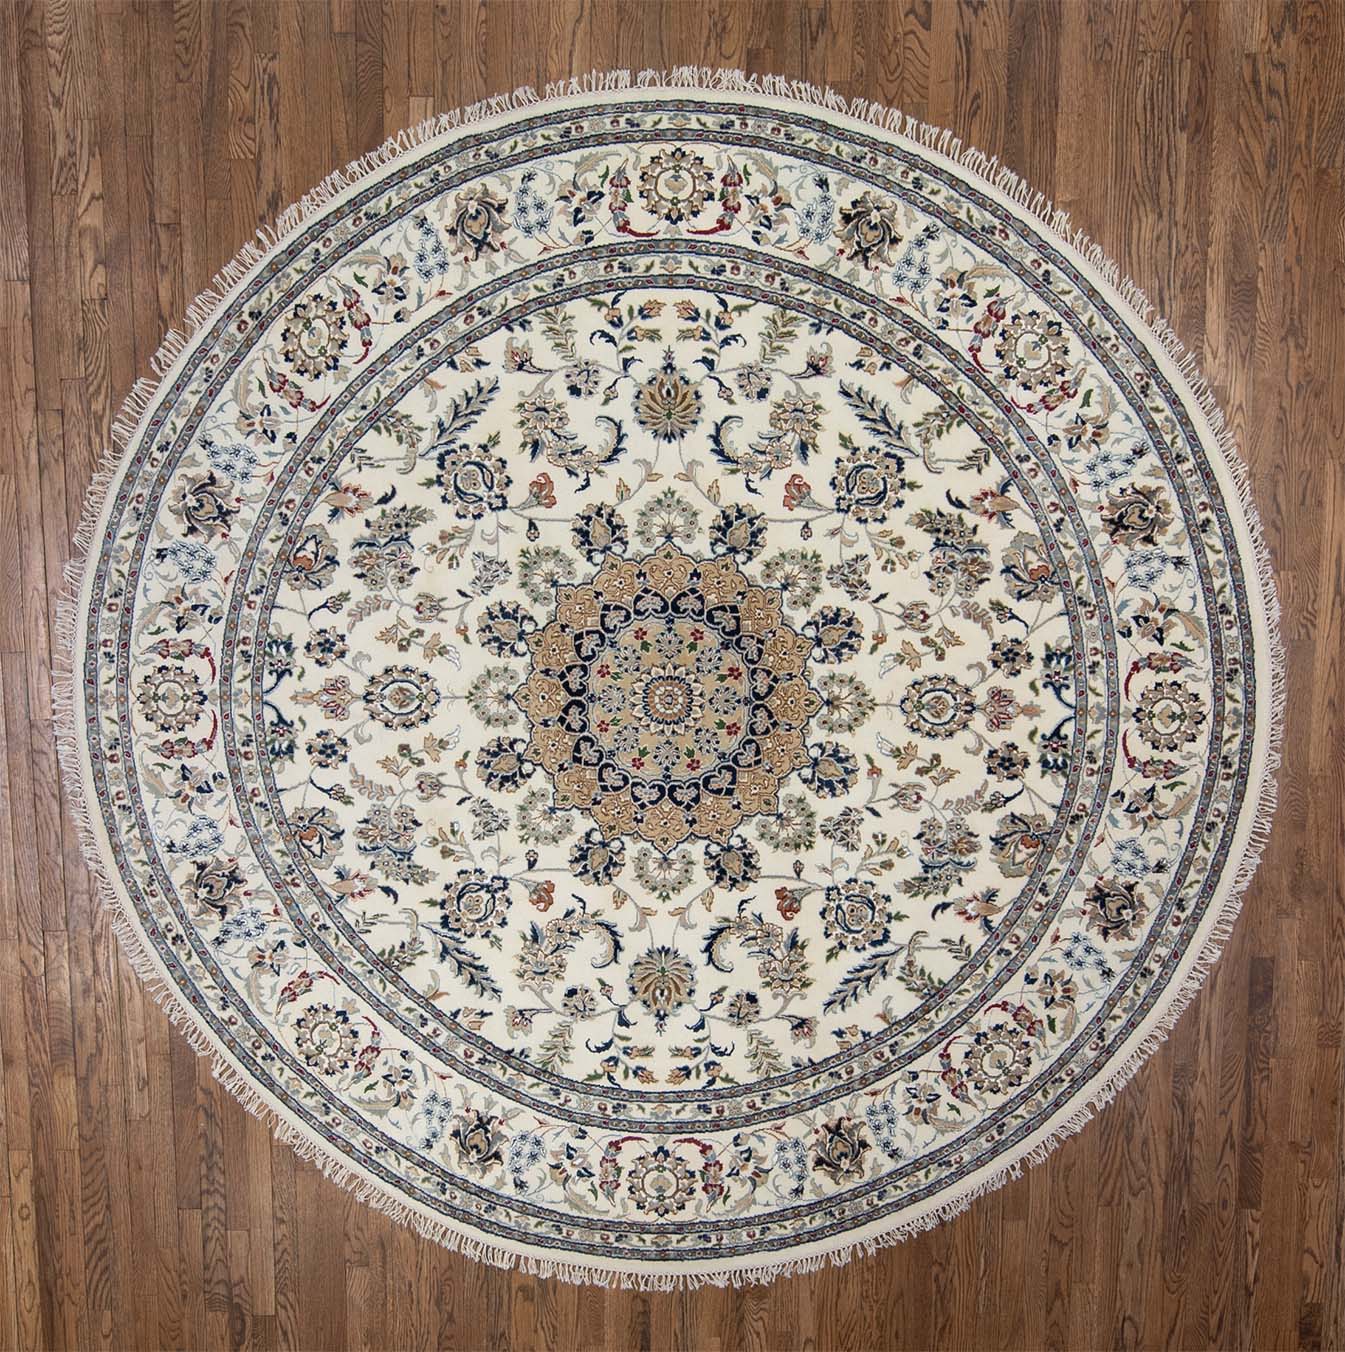 Round area rugs for living. Beautiful handmade Persian Nain style rug made in India. Size 9.2x9.2.